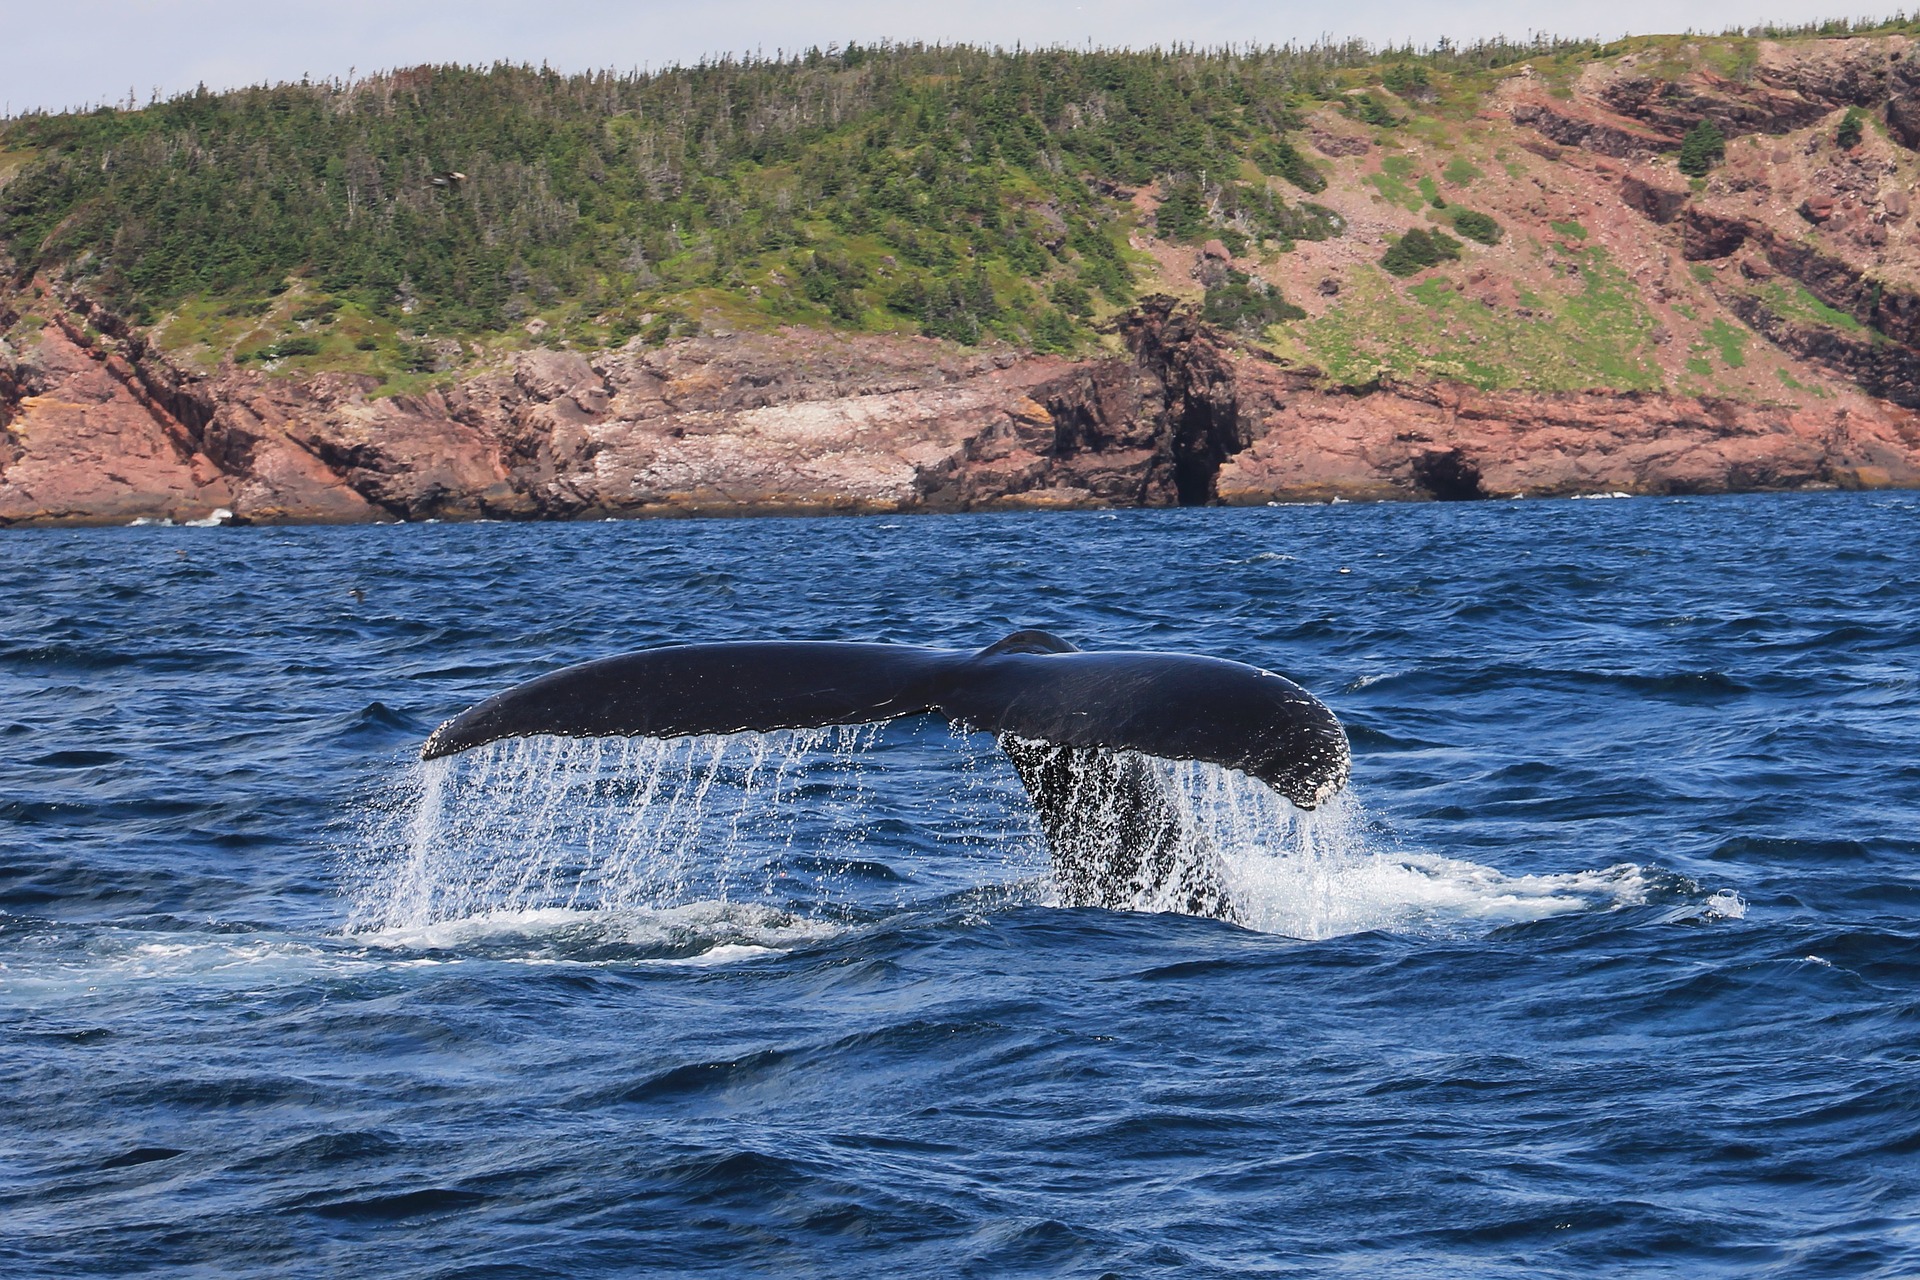 Whale tail breaching water, Newfoundland